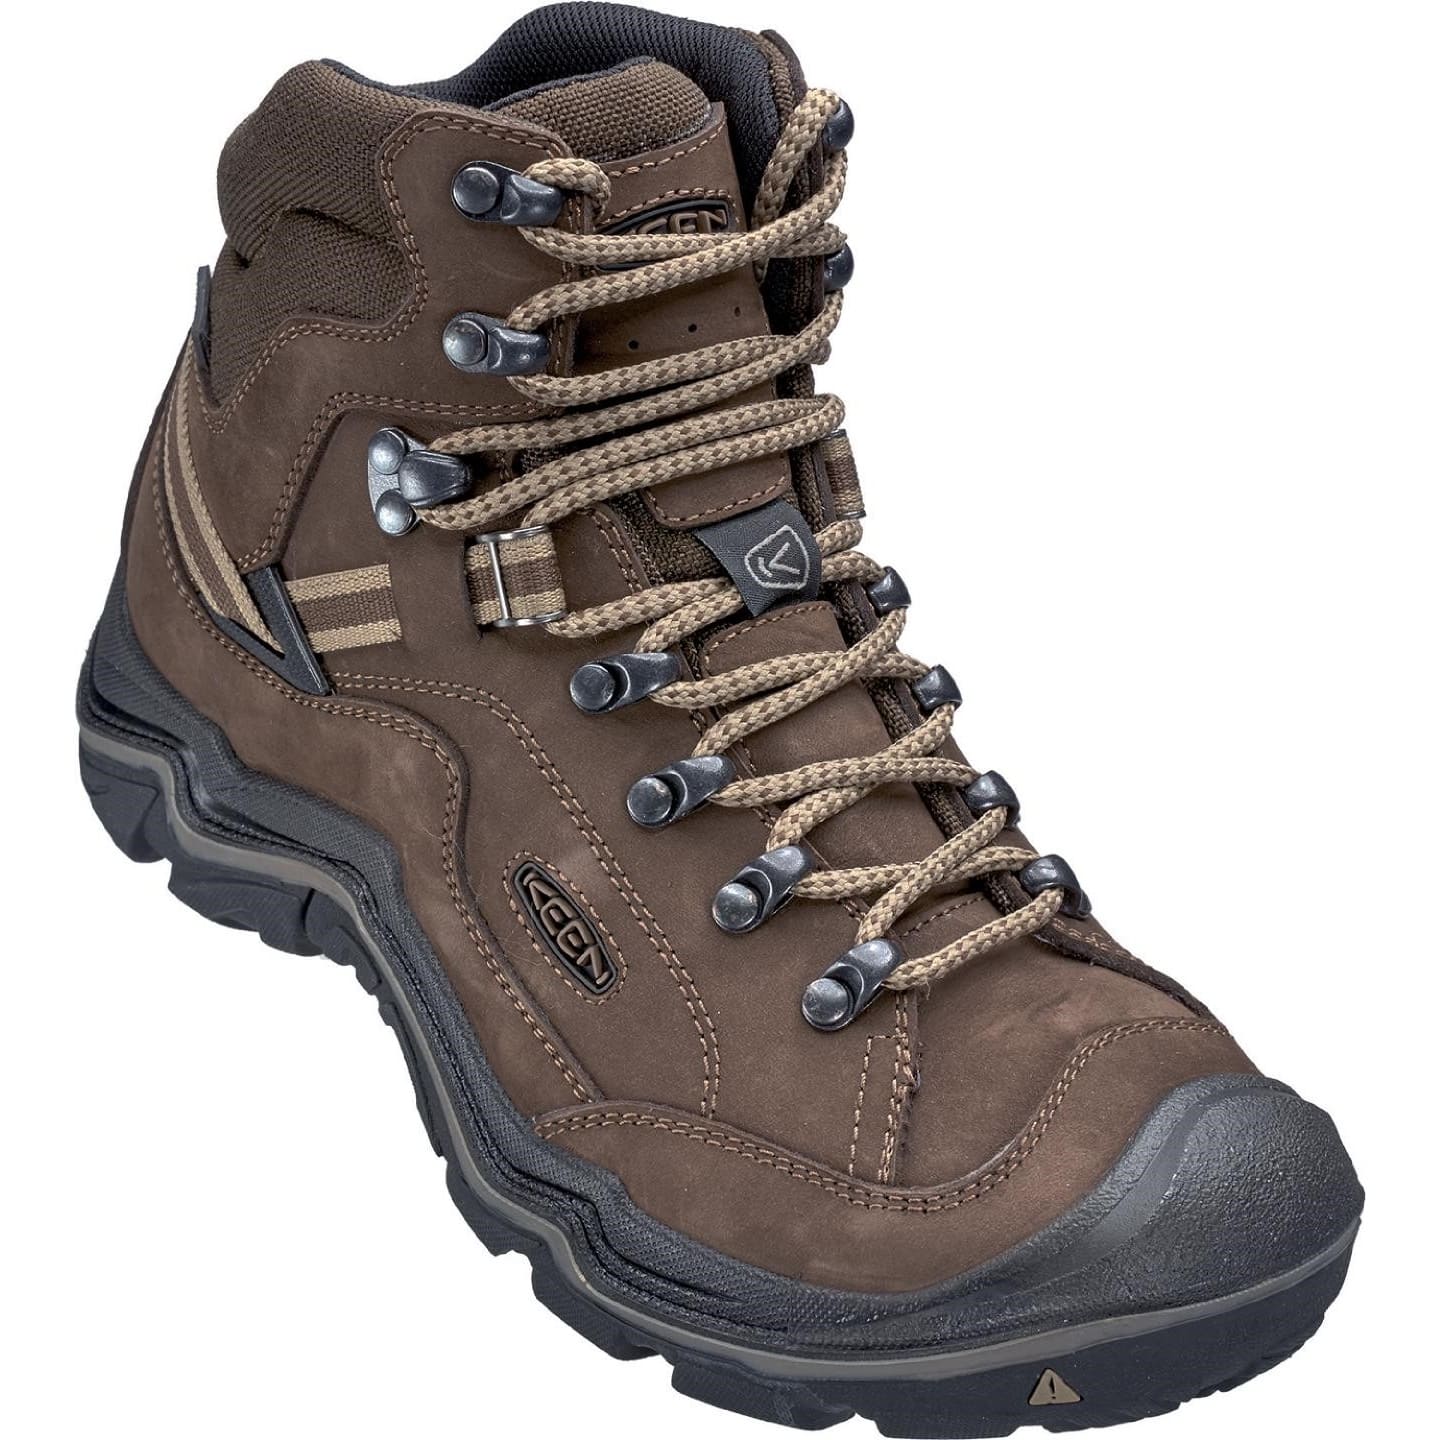 Buy Keen Galleo Mid Wp from Outnorth